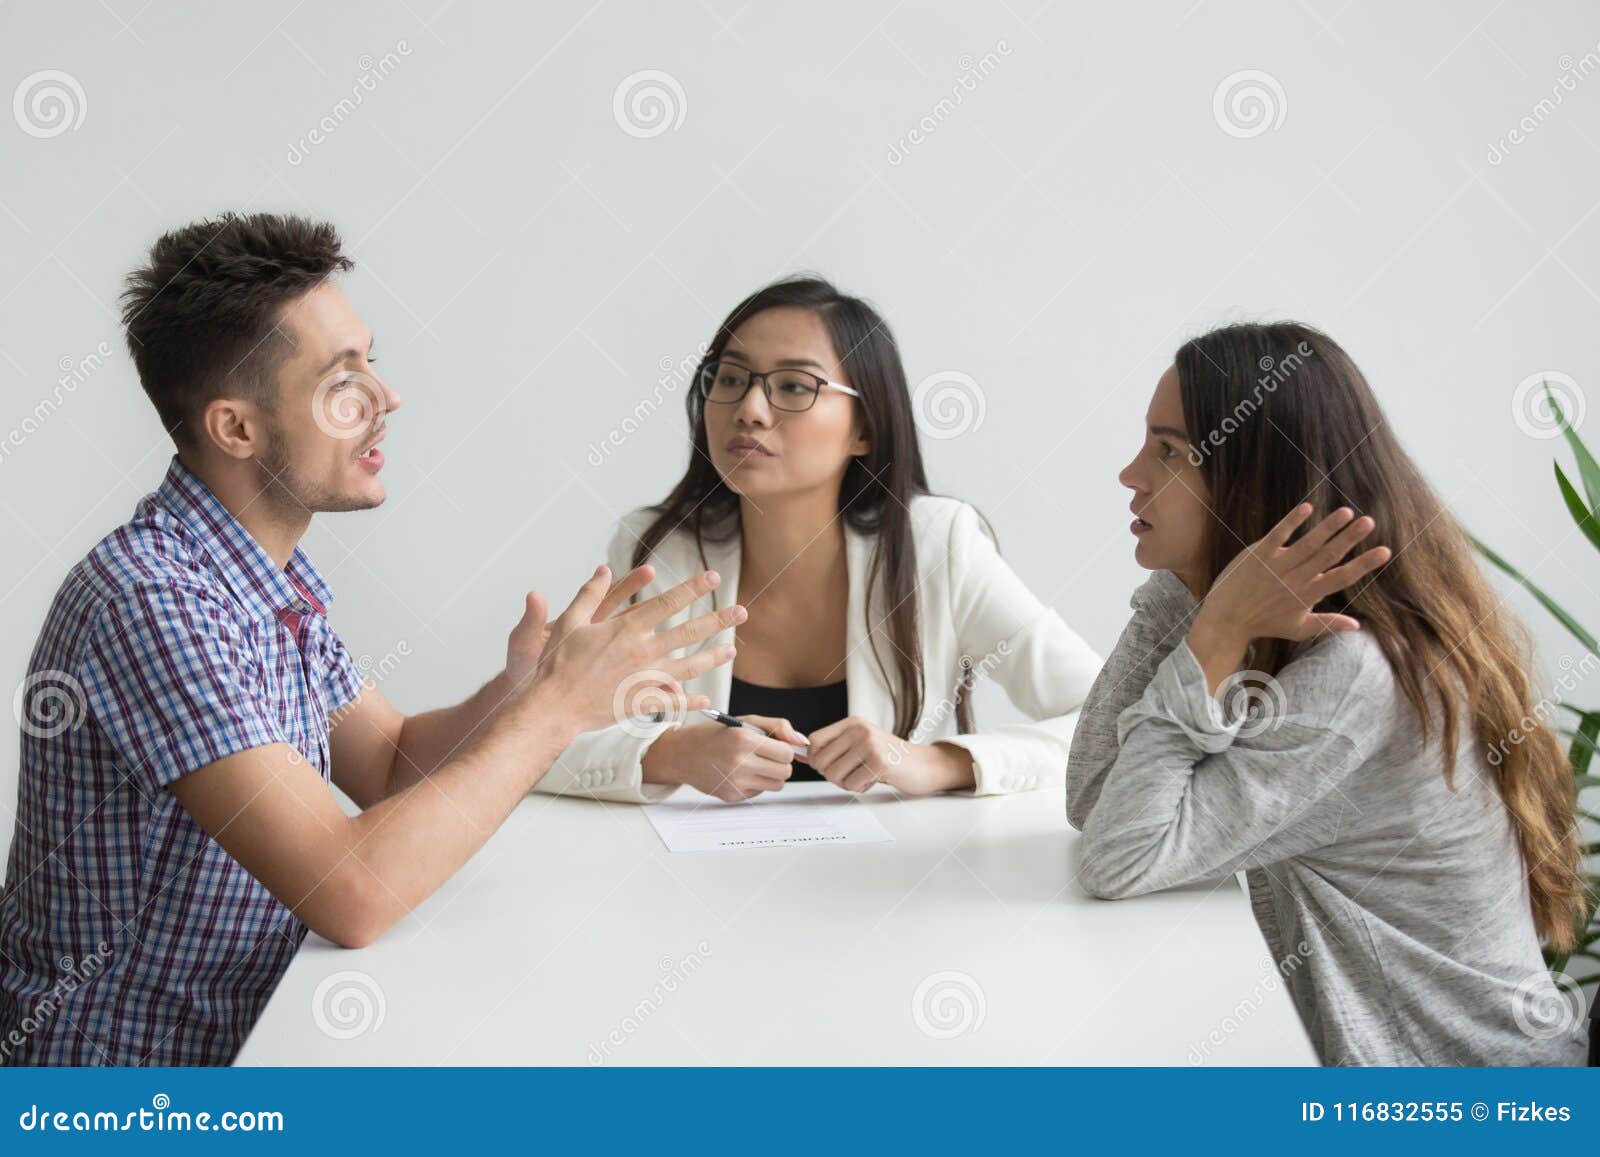 Nervous Couple Arguing In Psychologist Office Stock Image Image Of Advisor Discussing 116832555